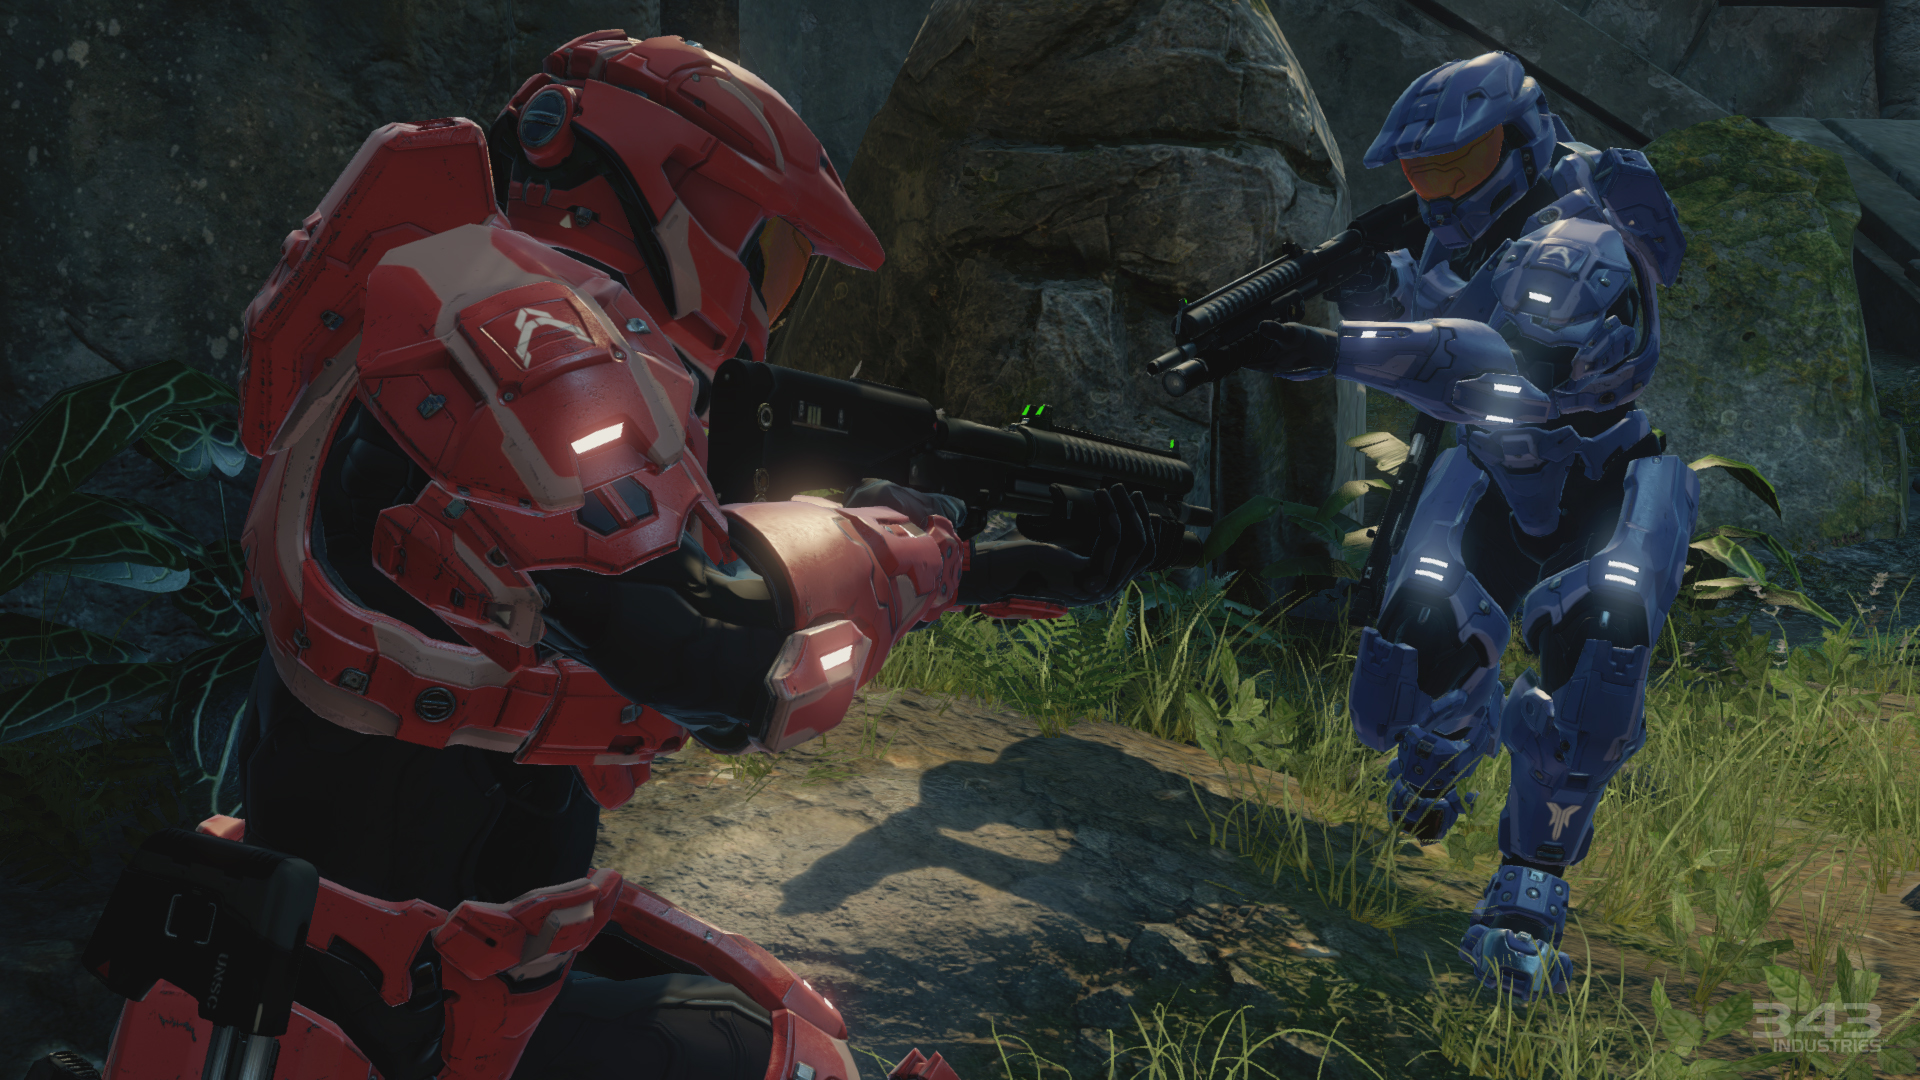 Halo: Master Chief Collection' comes to PC, 'Halo: Reach' out now